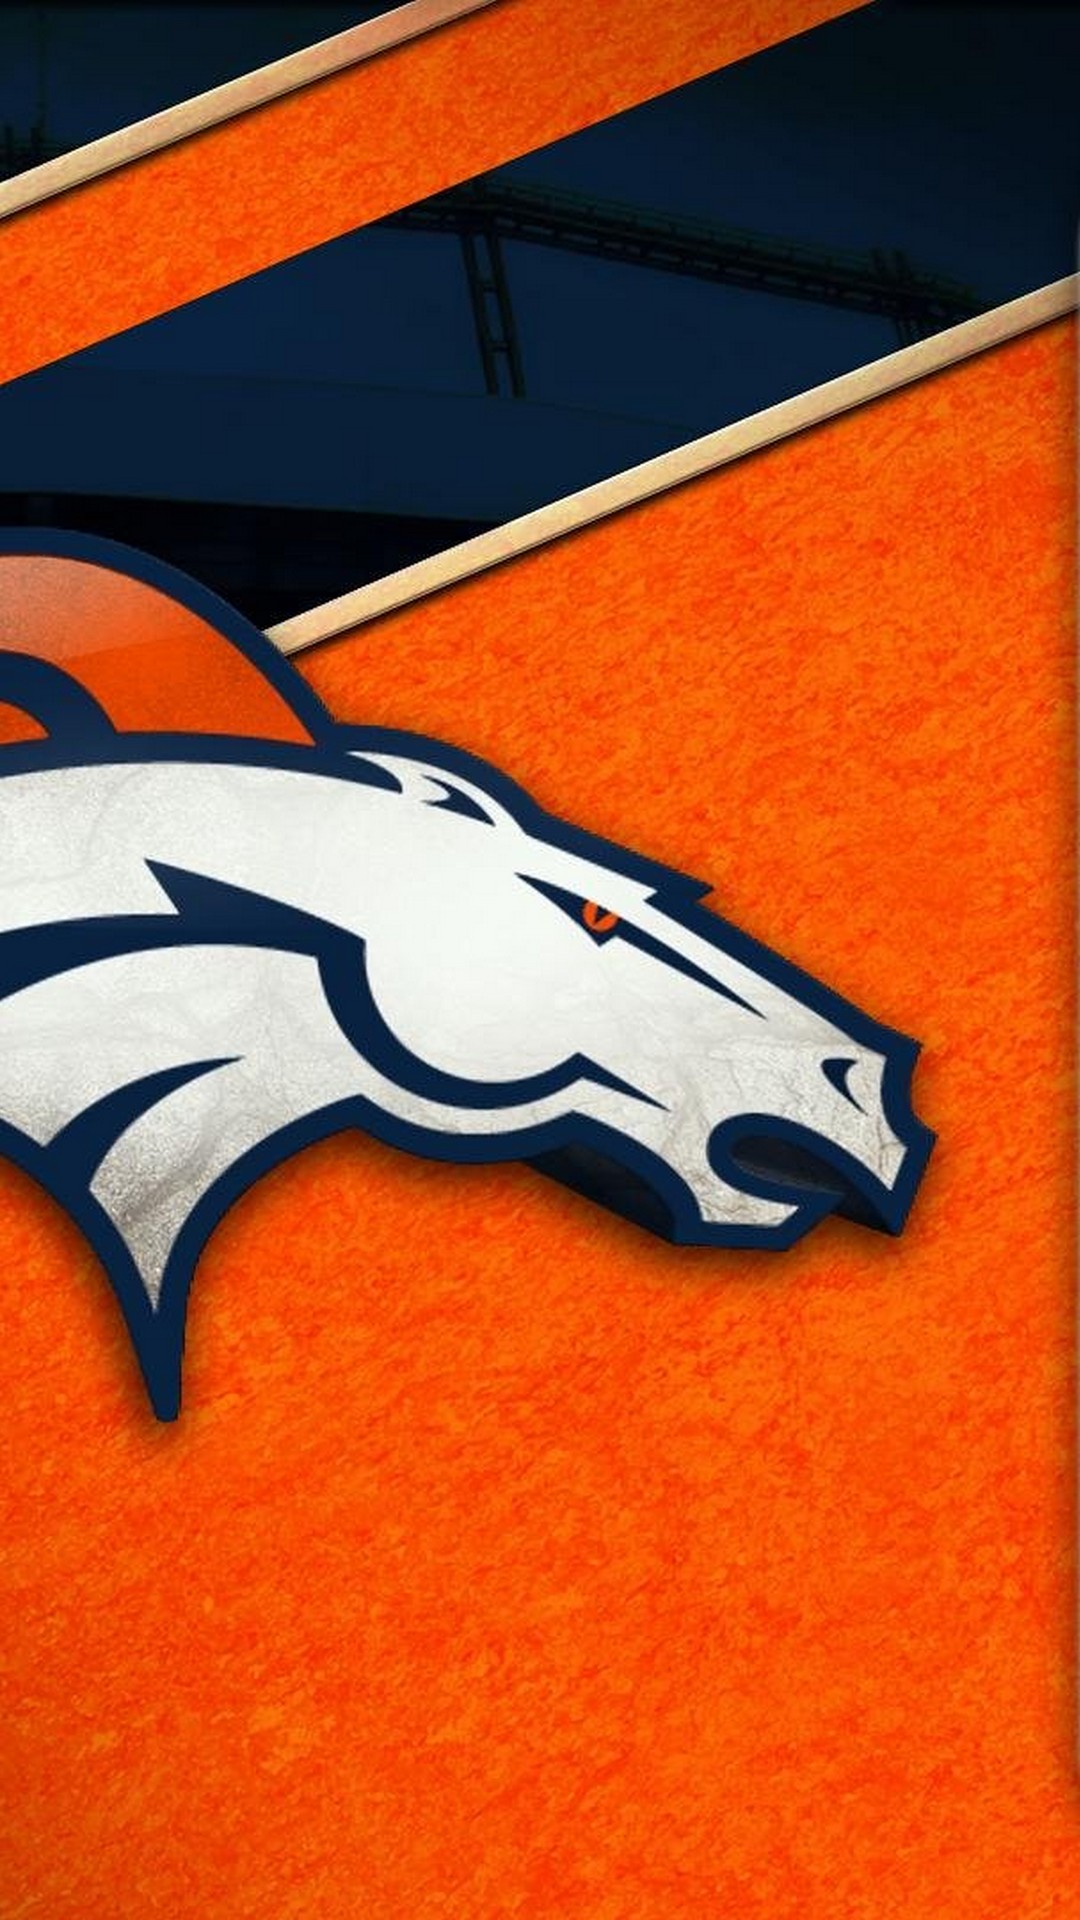 Denver Broncos iPhone Wallpaper with high-resolution 1080x1920 pixel. Download and set as wallpaper for Apple iPhone X, XS Max, XR, 8, 7, 6, SE, iPad, Android